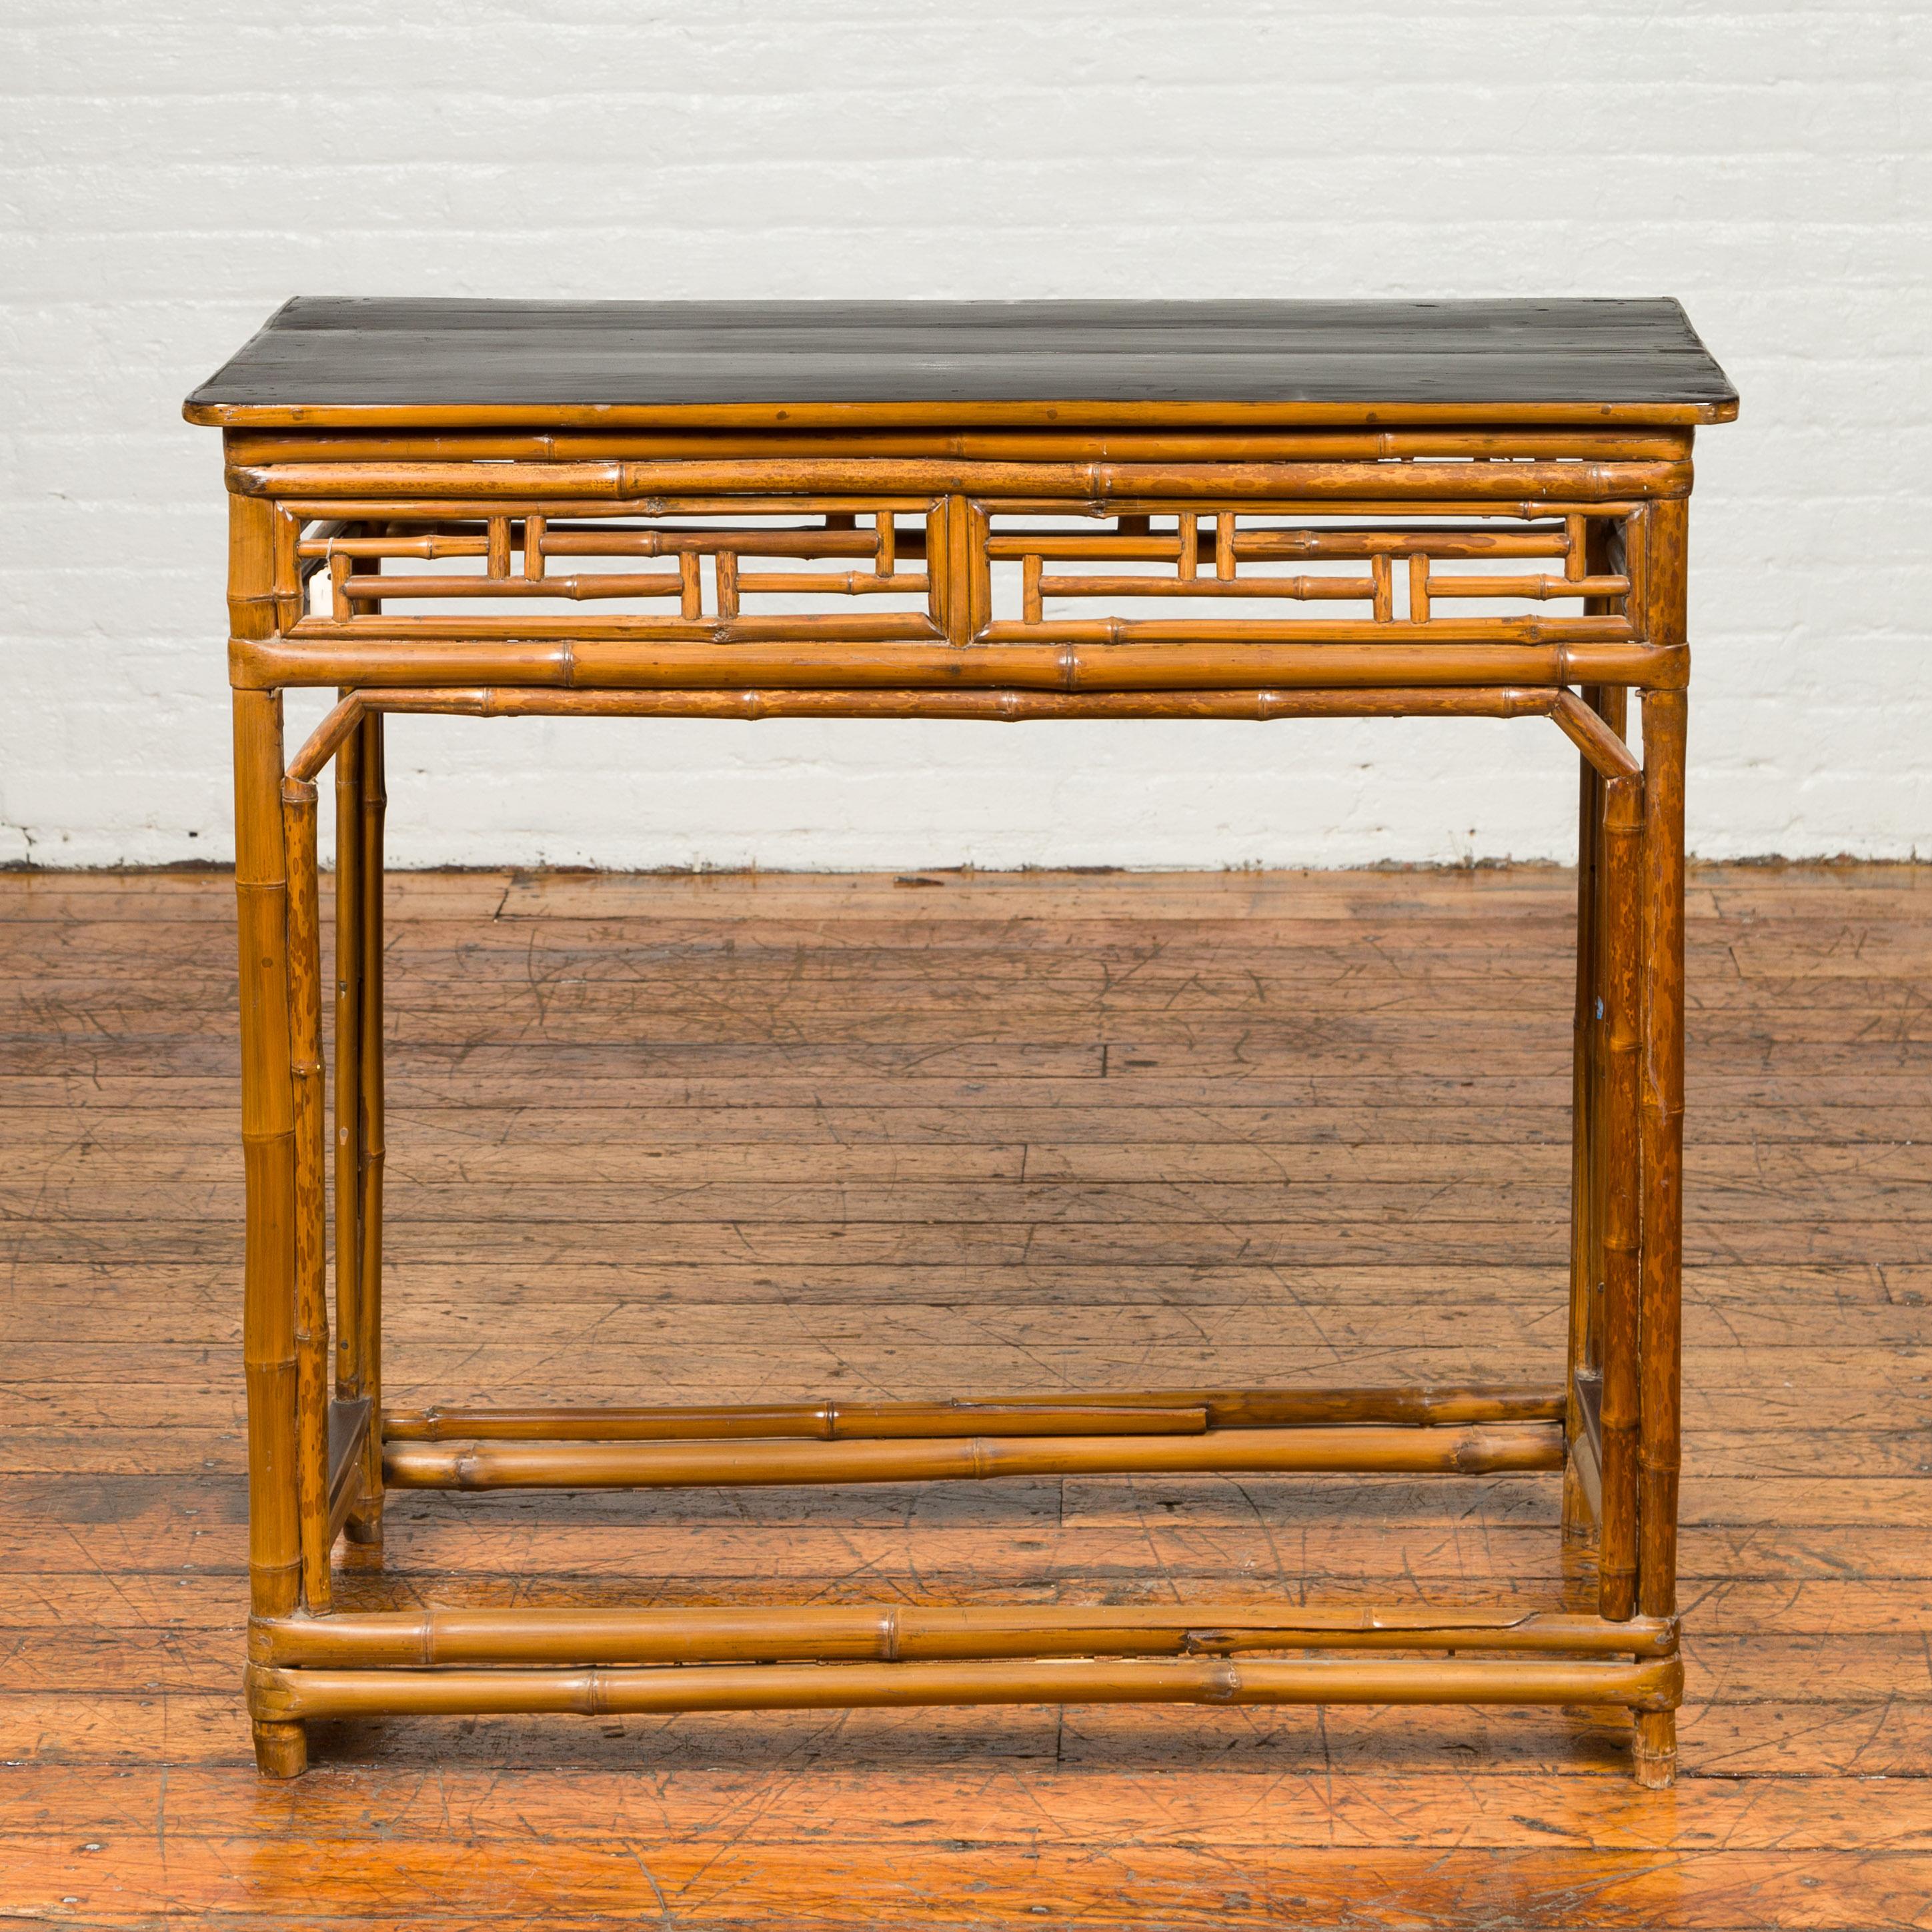 A Chinese Qing dynasty bamboo altar console table from the 19th century, with black lacquered top and geometric motifs. Born in China during the 19th century, this altar table features a black lacquered rectangular top sitting above a bamboo base